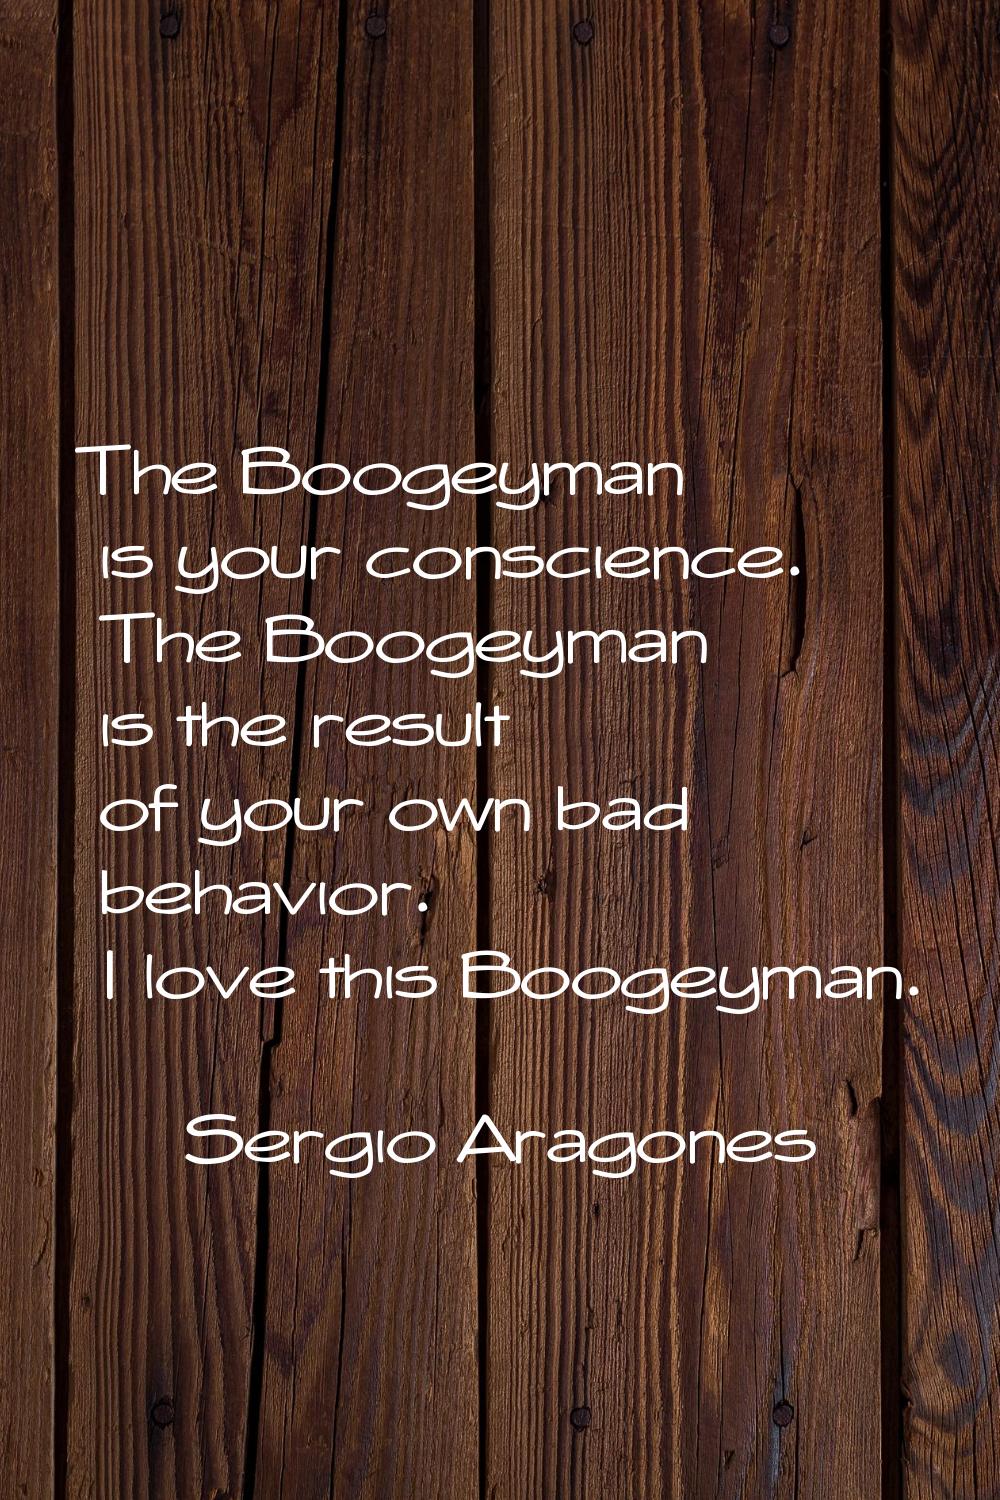 The Boogeyman is your conscience. The Boogeyman is the result of your own bad behavior. I love this